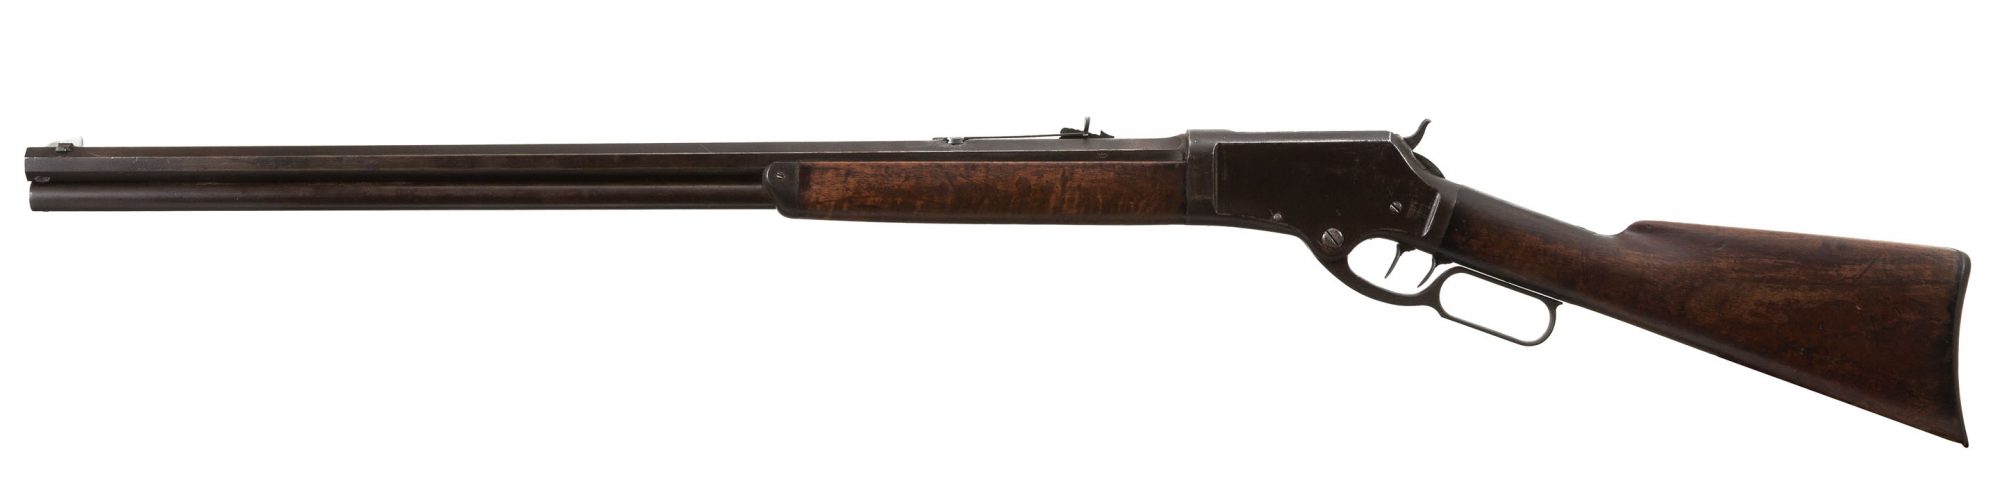 Photo of a Marlin 1881 from 1883, for sale by Turnbull Restoration of Bloomfield, NY